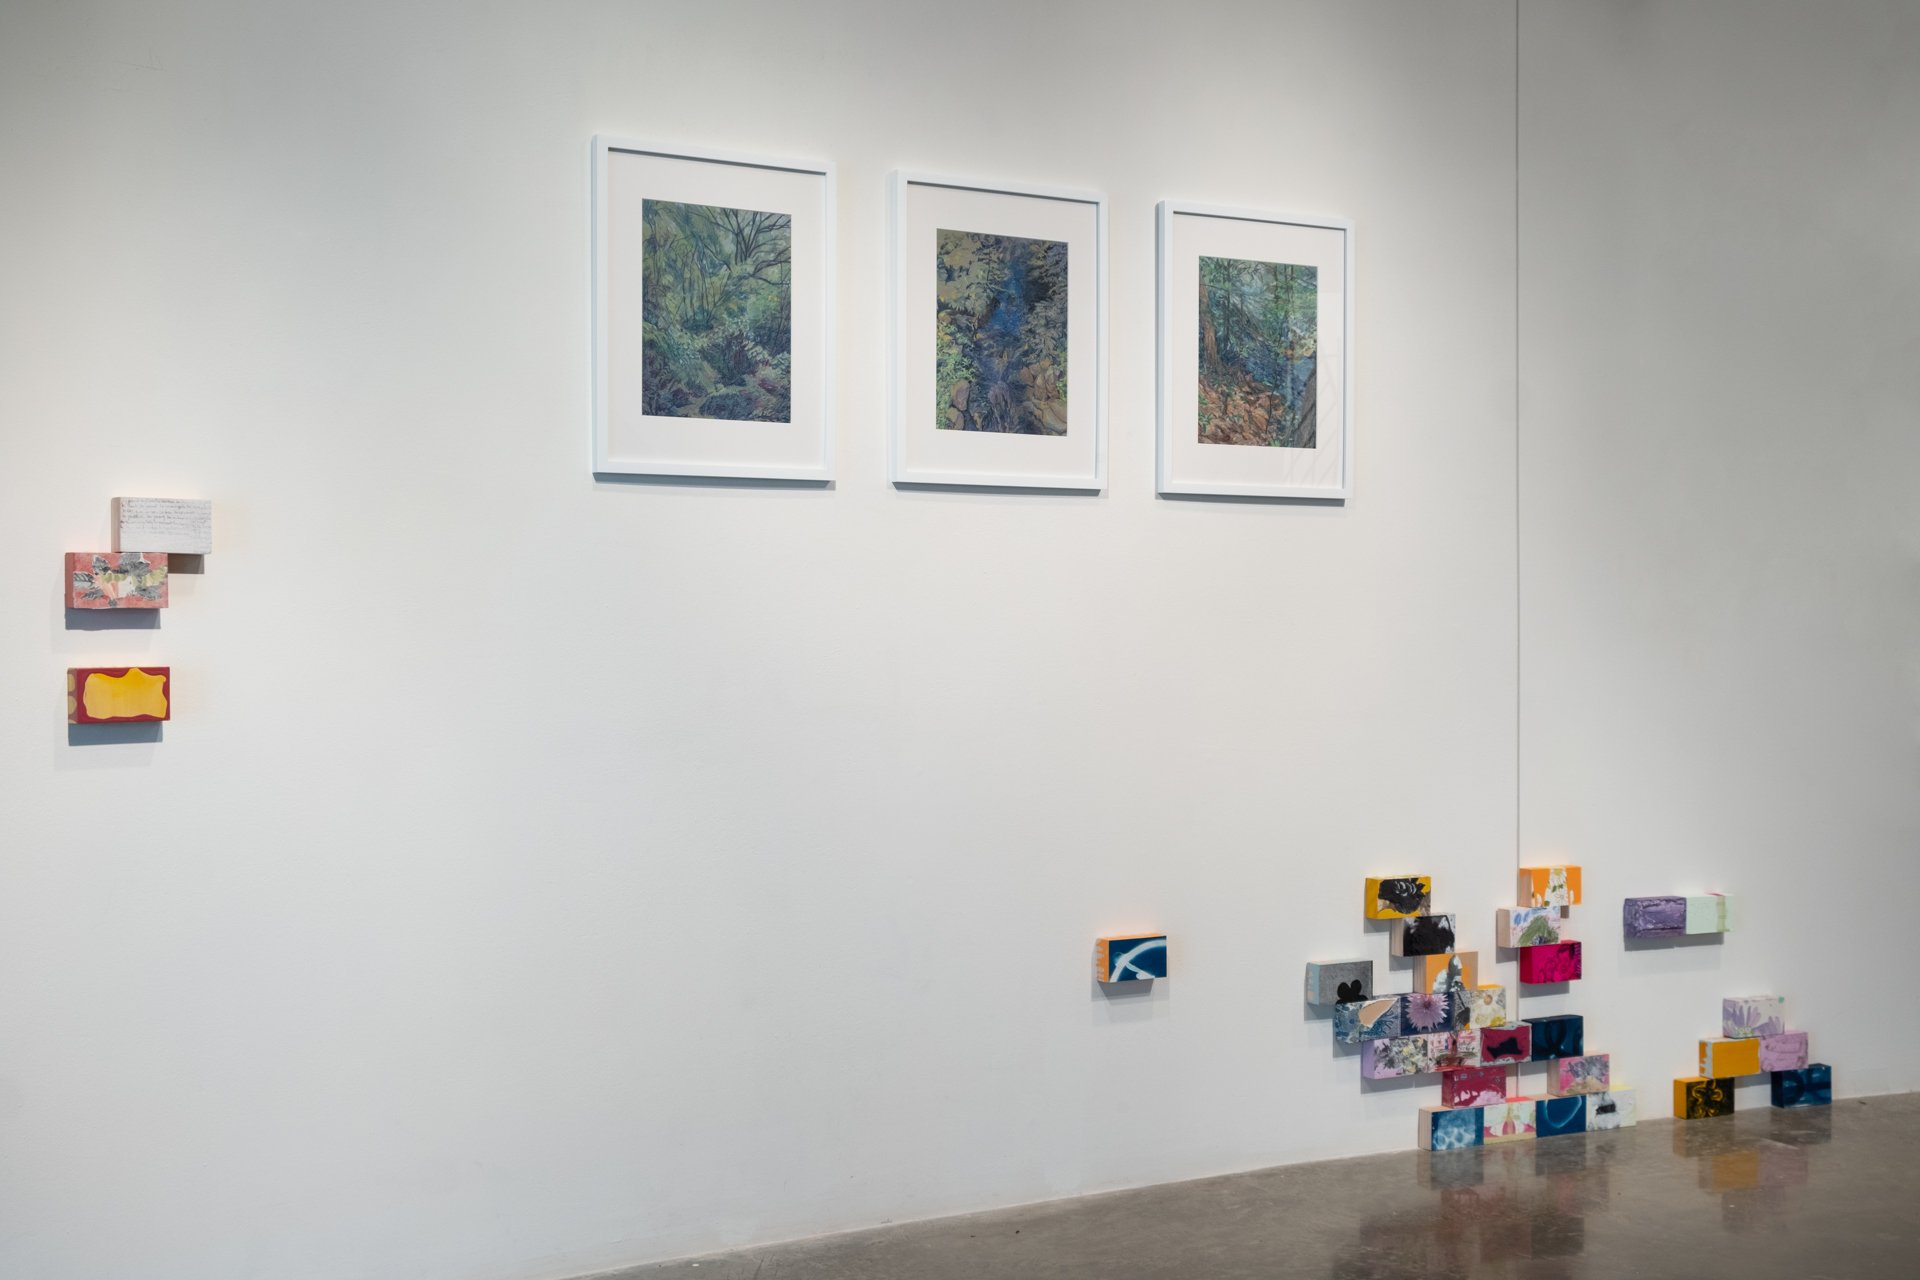 installation view of "Wall Fragments" 